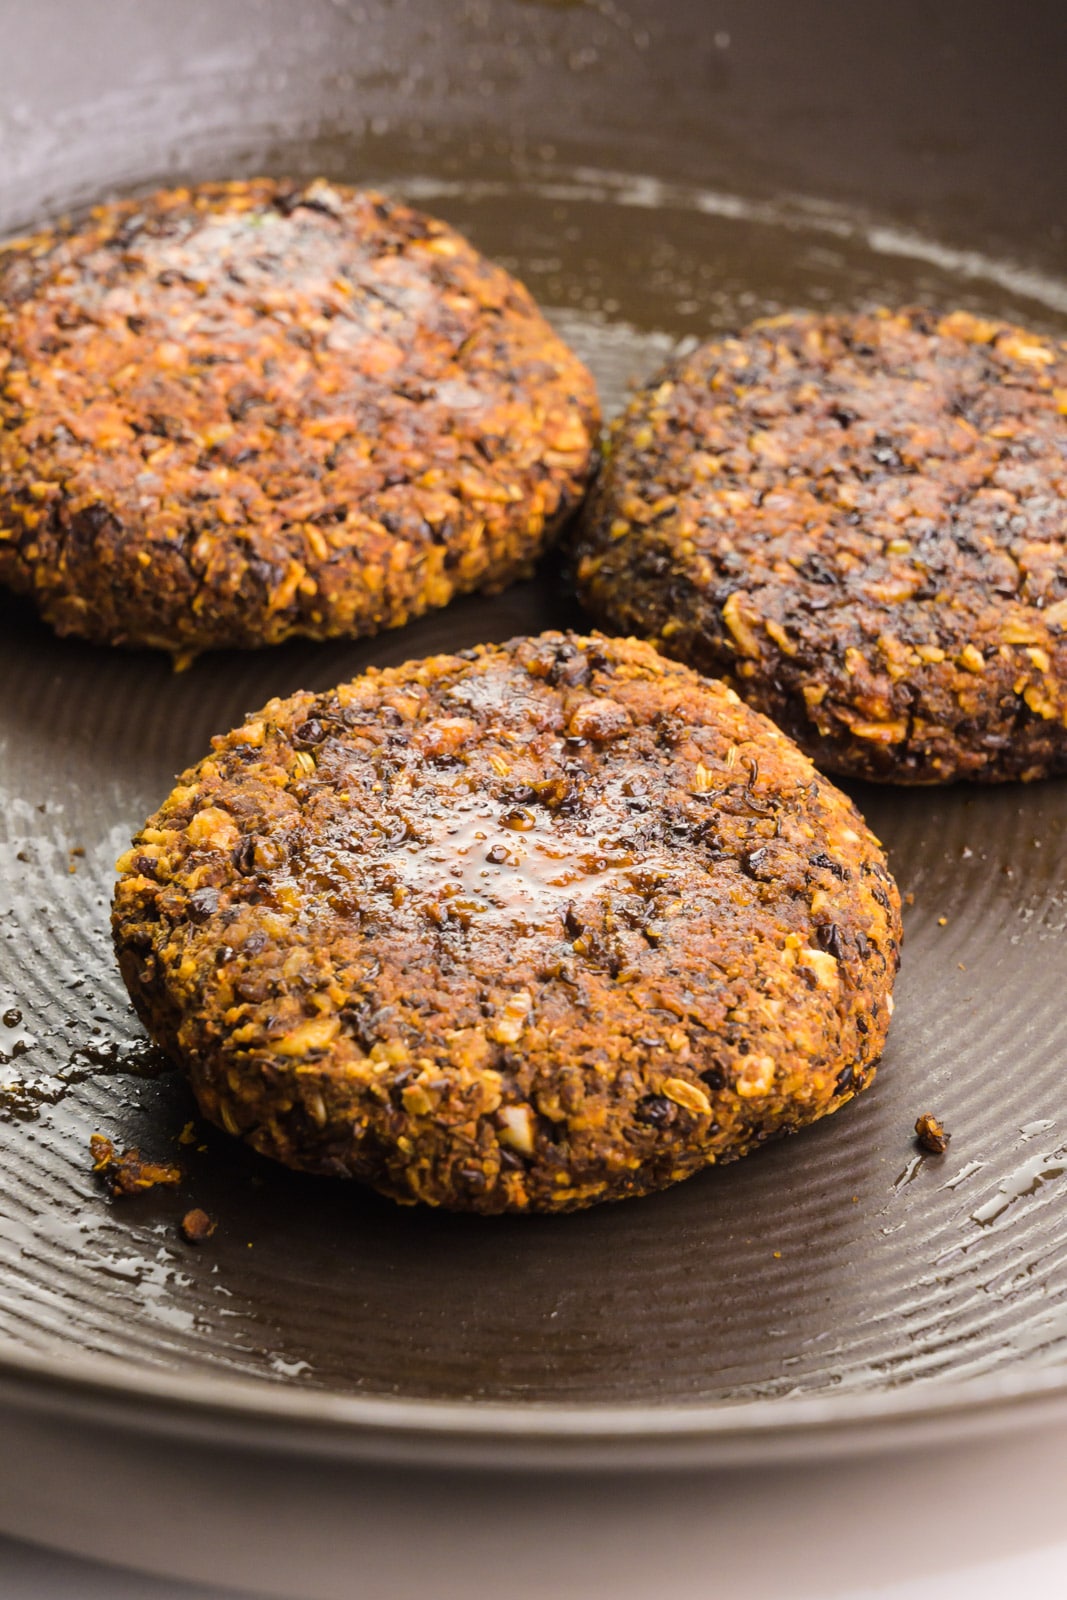 Vegan breakfast sausage patties are being cooked in a skillet.